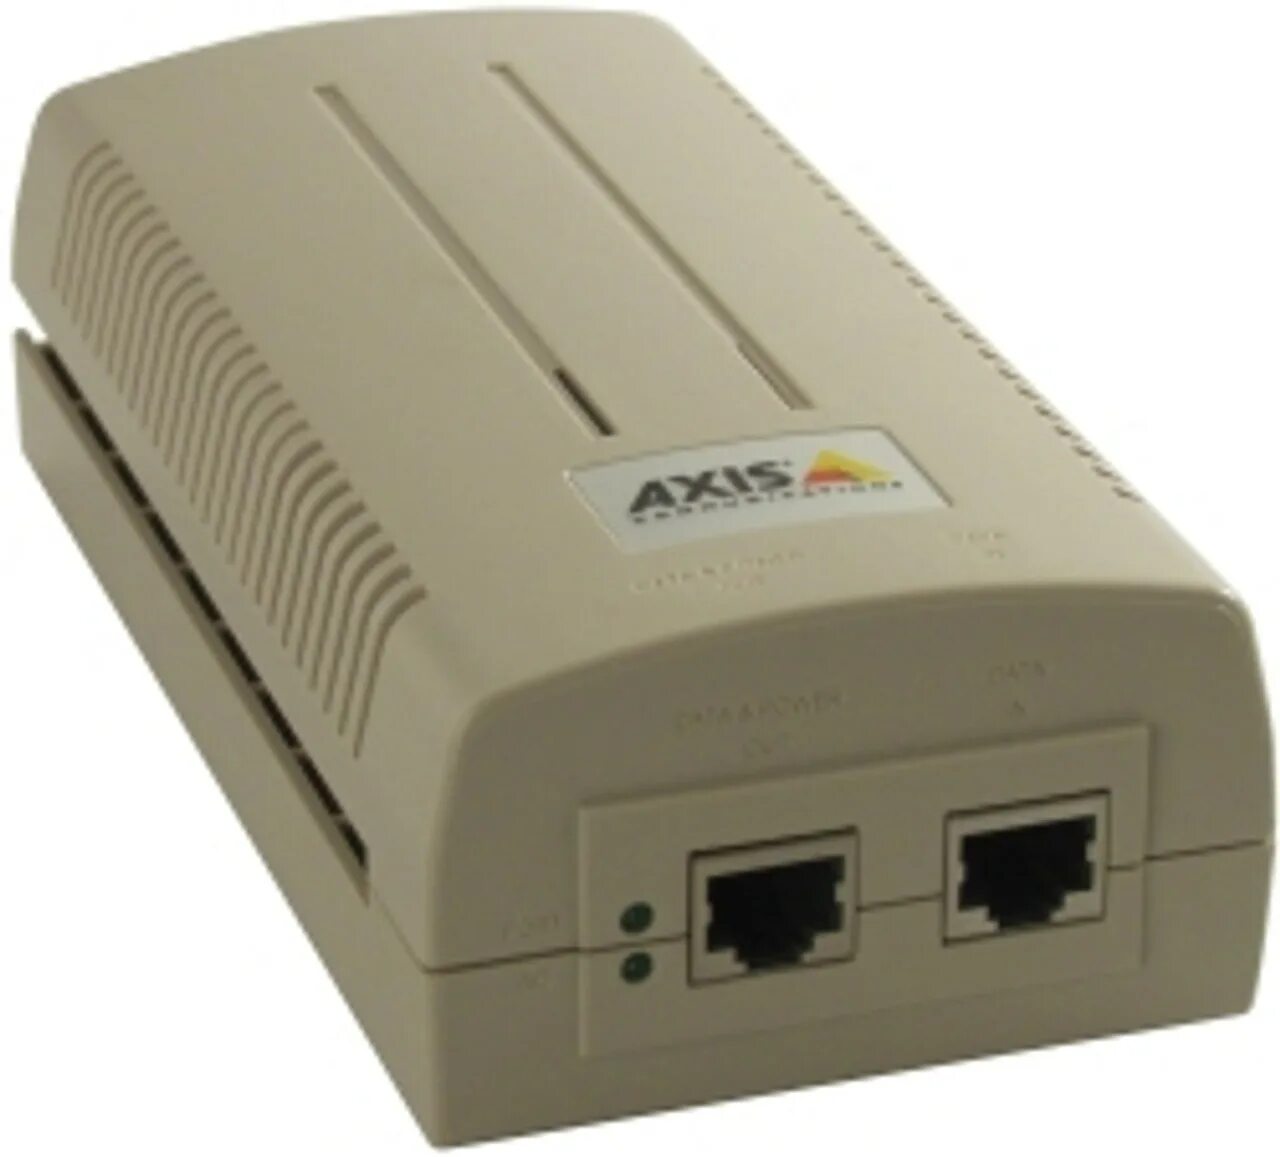 High poe. Axis t8124 High POE 60w Midspan 1-Port. Axis t8123 High POE Midspan. Axis t8124 High POE 60w Midspan 1-Port индикация. Axis t8134 Midspan 60w.